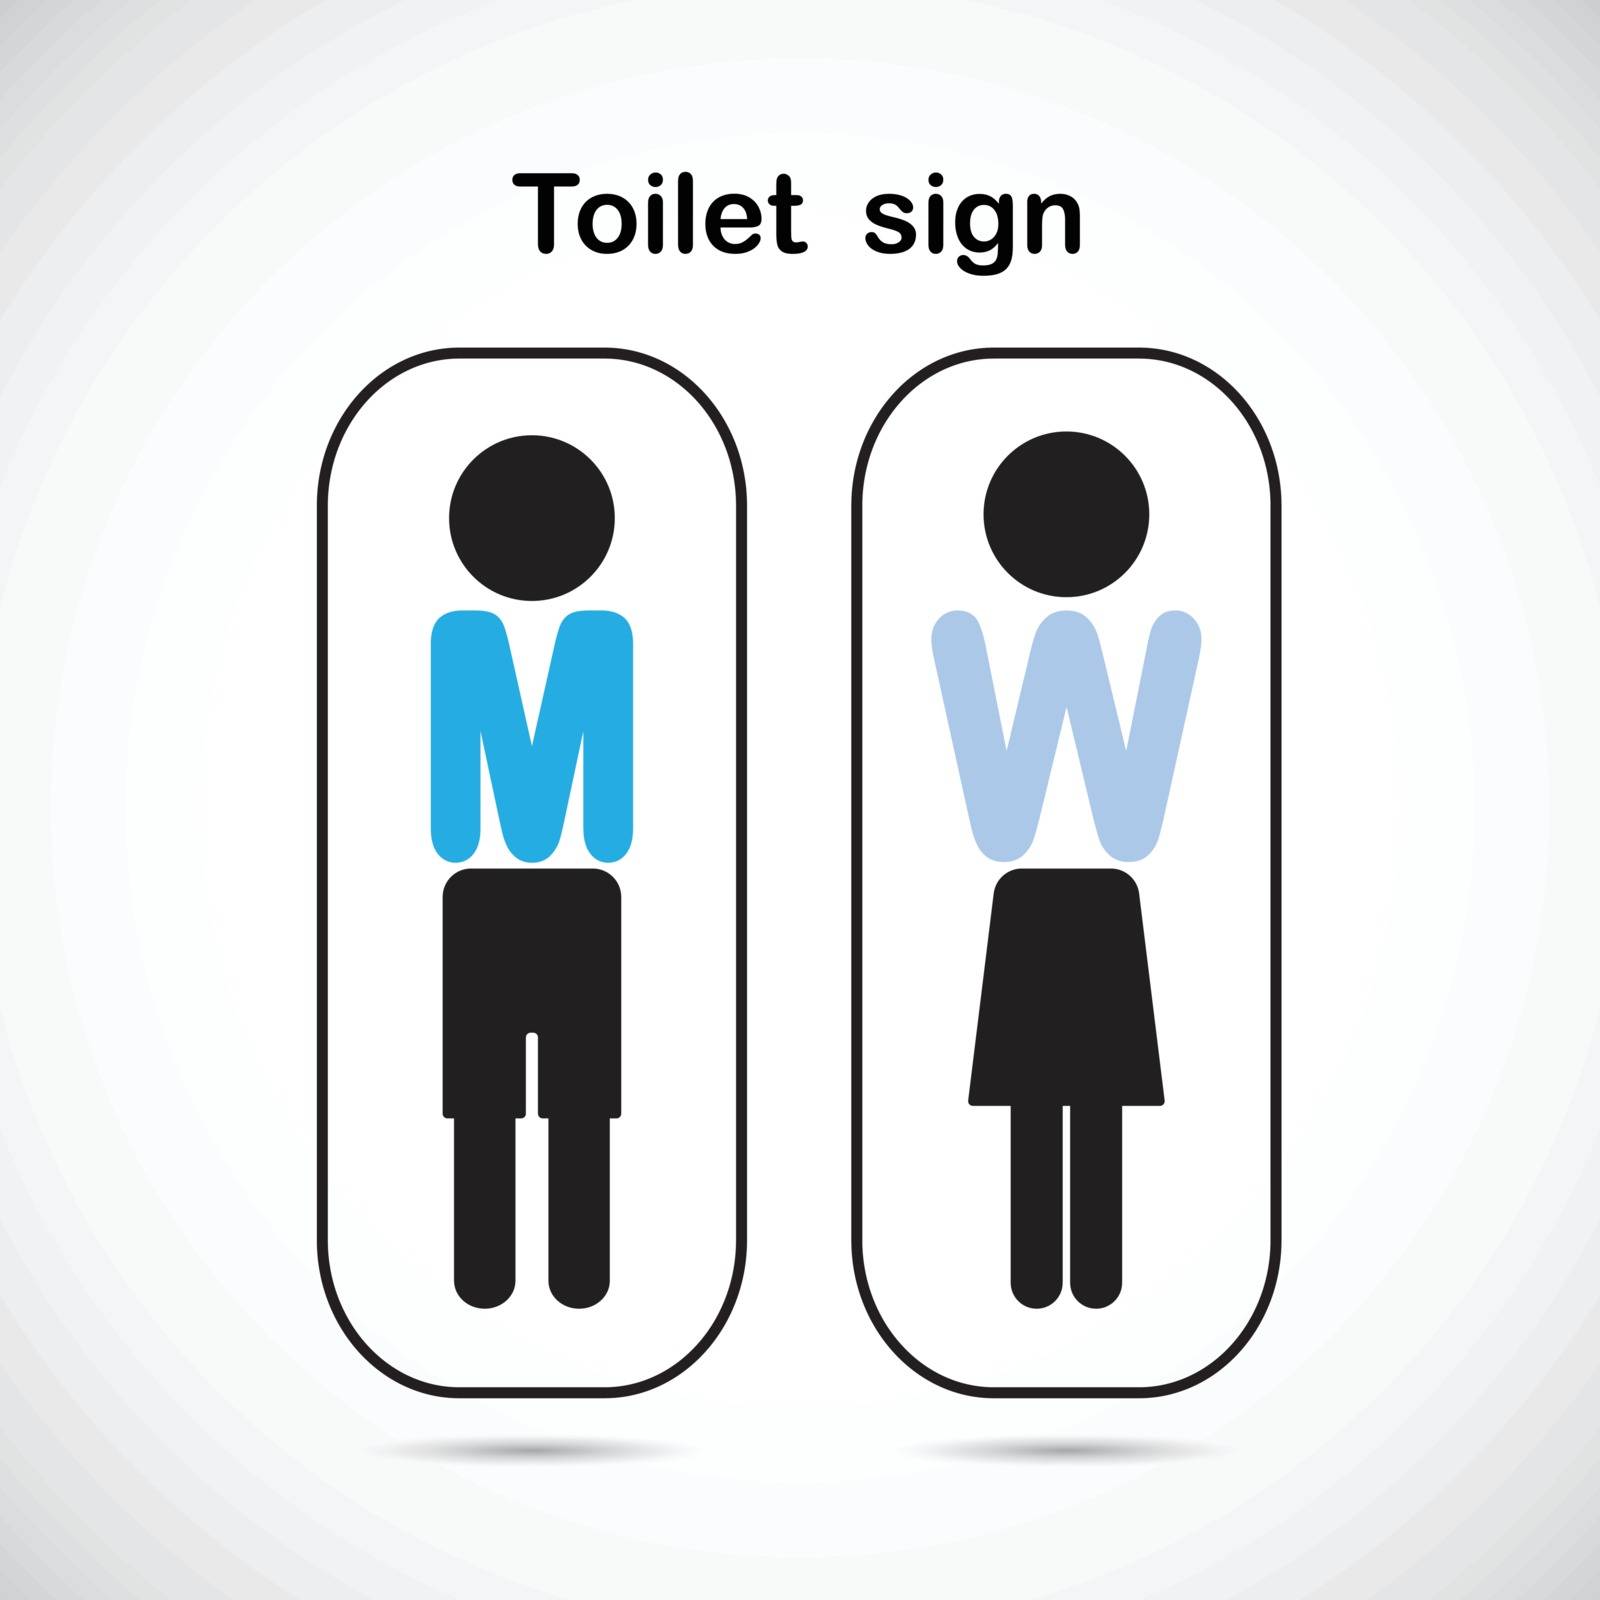 toilet sign by chatchai5172